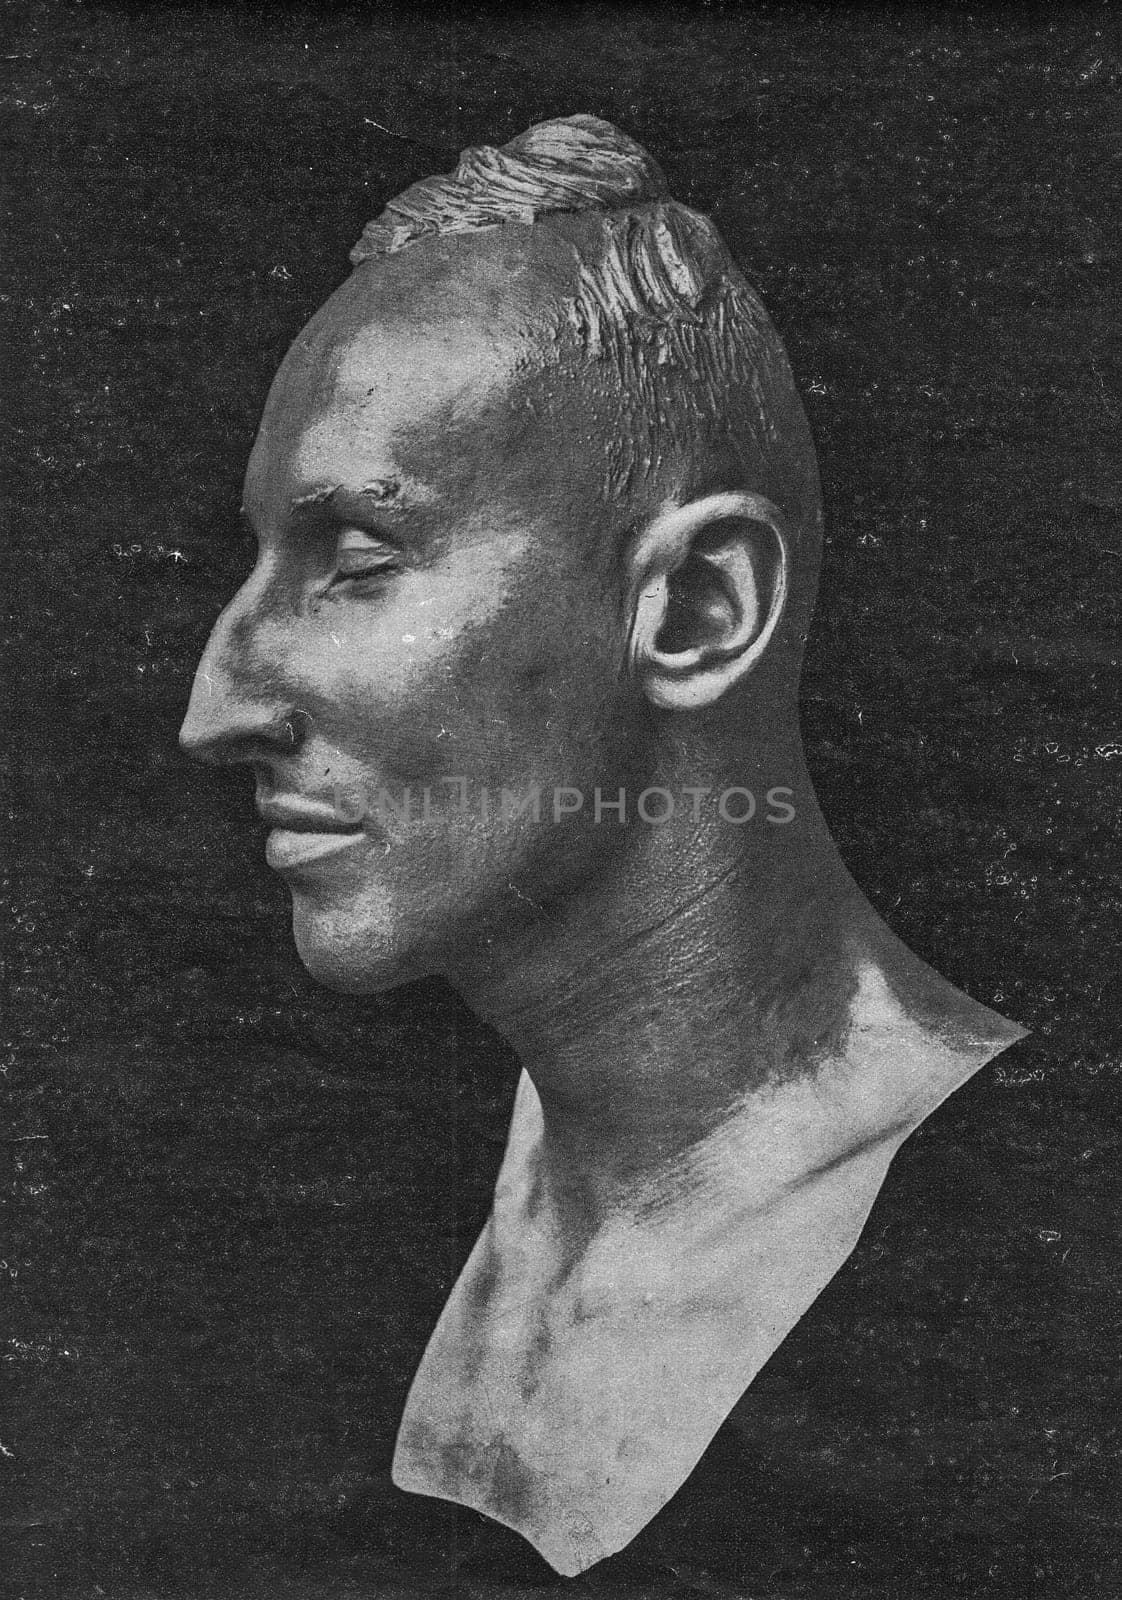 PRAGUE, PROTECTORATE OF BOHEMIA AND MORAVIA - 1942: Death mask of Reinhard Heydrich, made by Prof. Franz Rotter (sculptor).